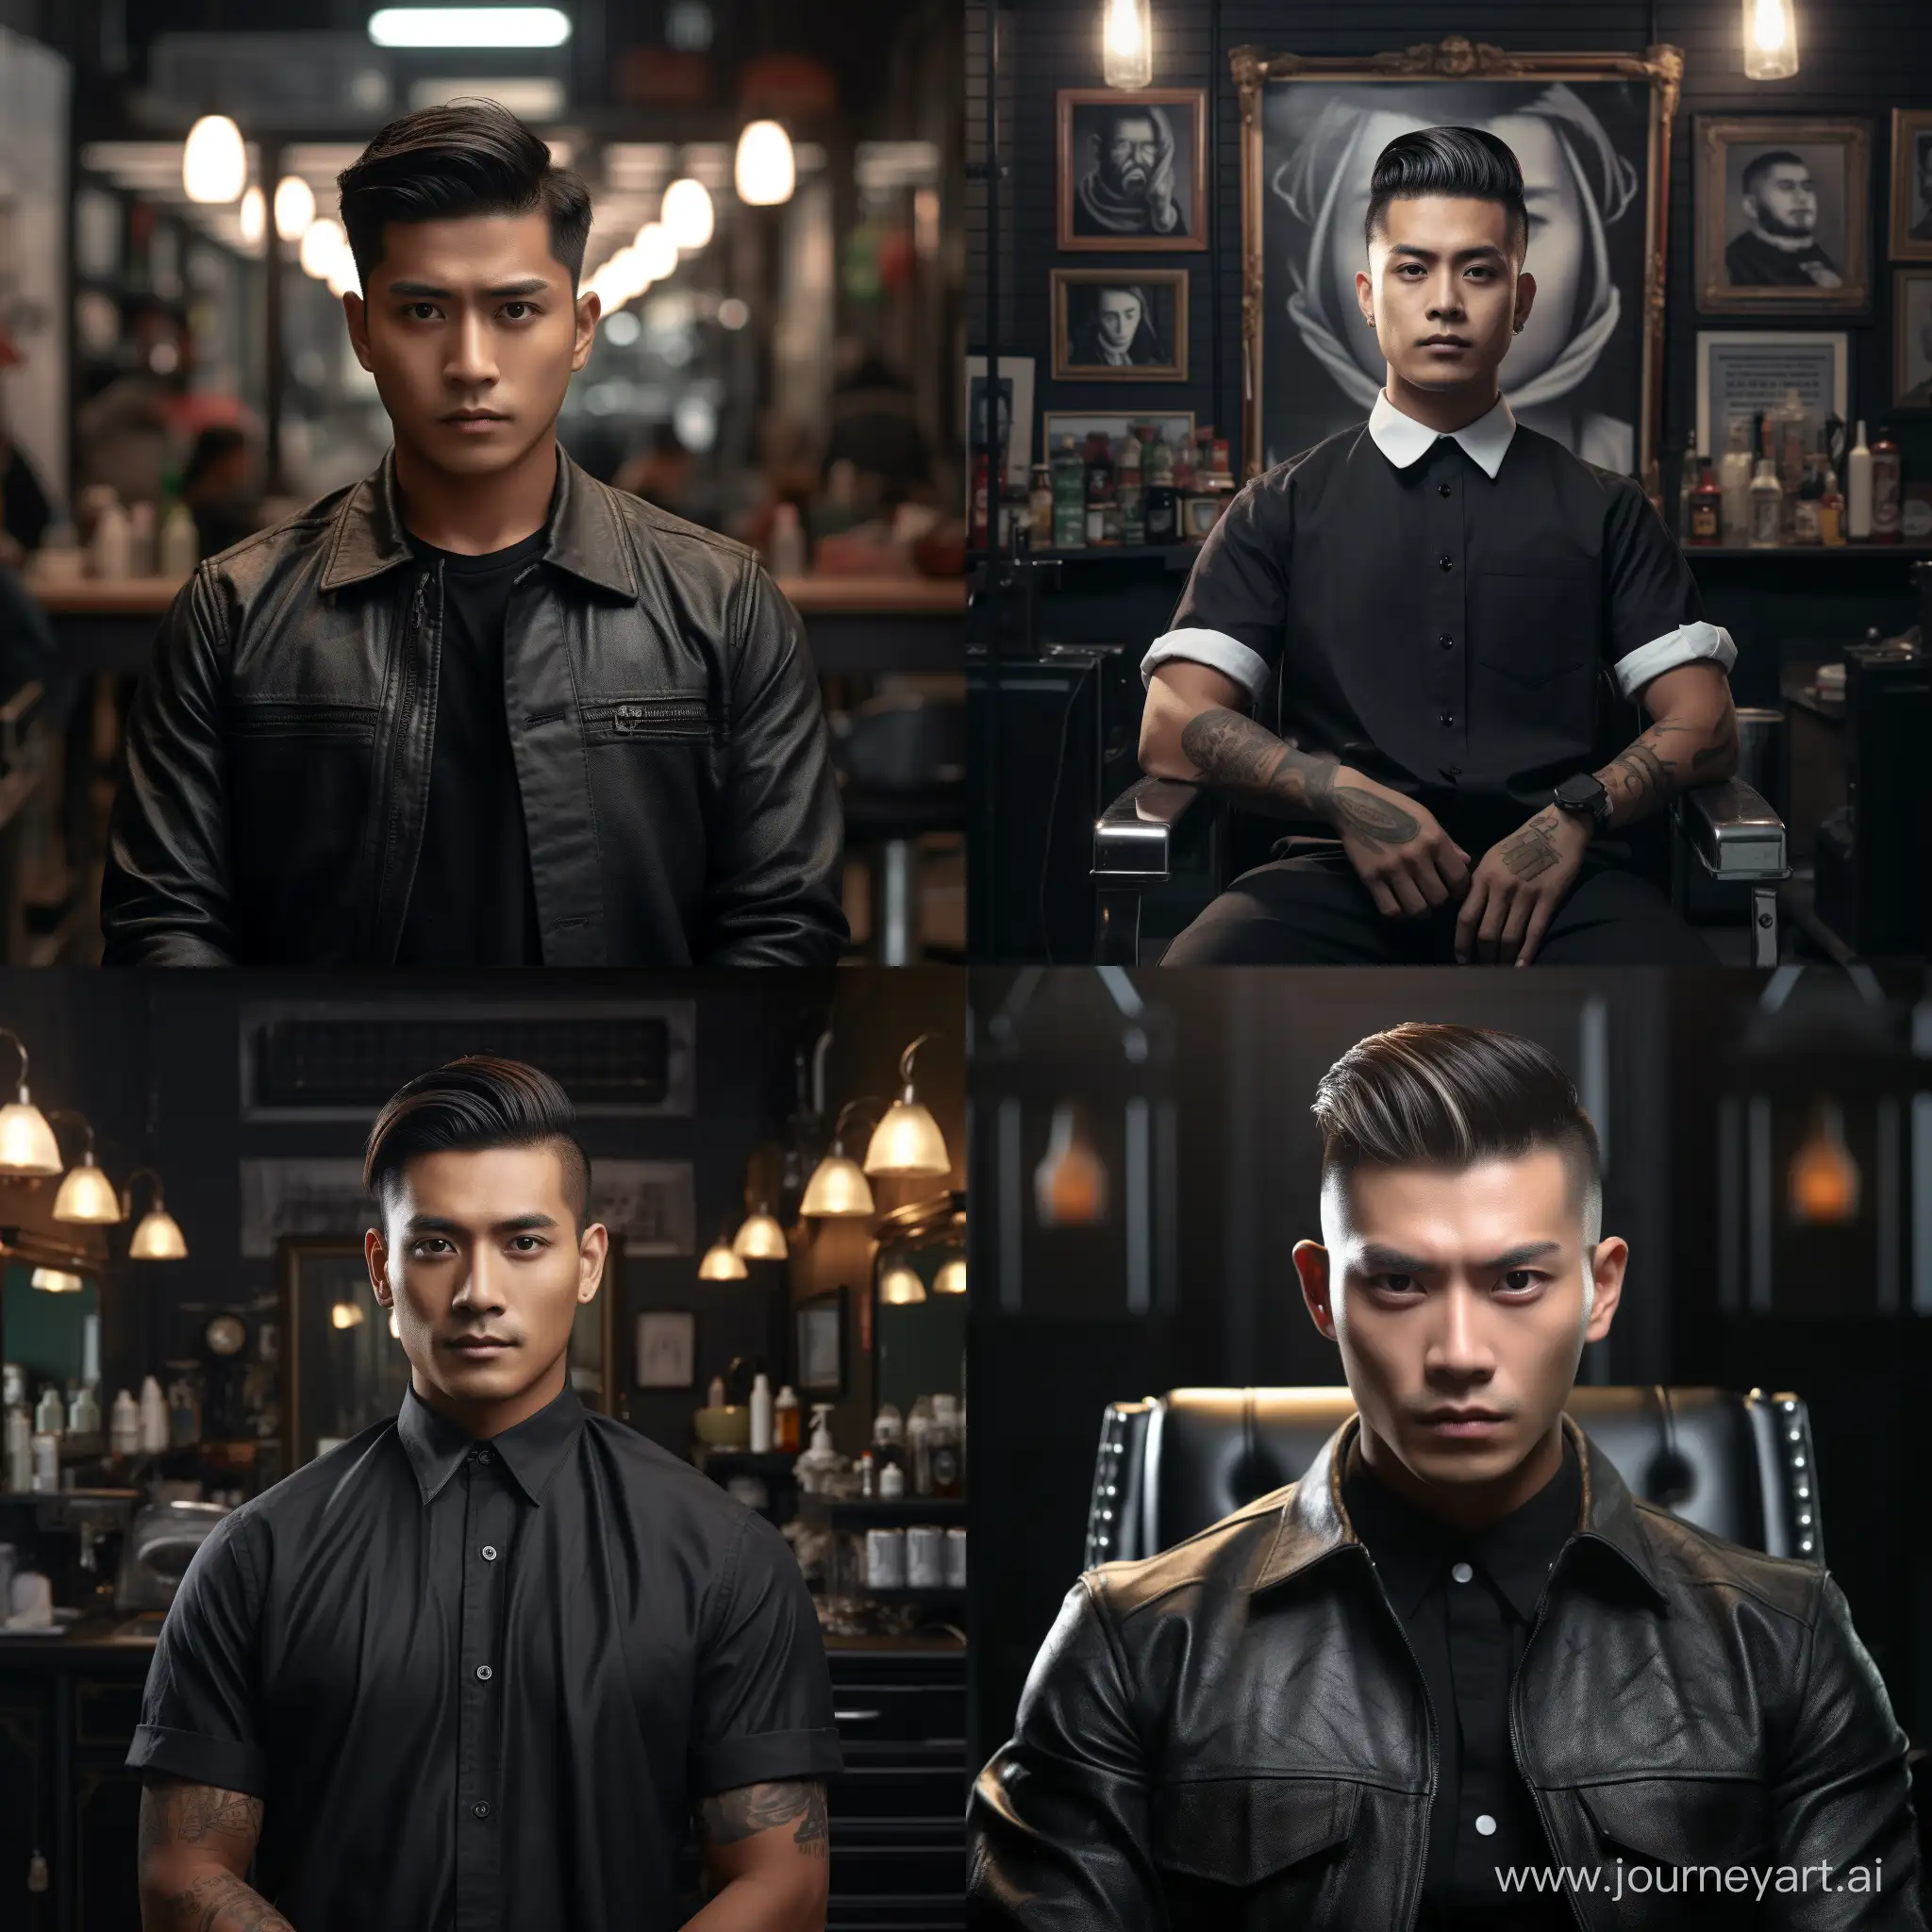 Indonesian-Cool-Barber-Creating-Hyperrealistic-Hairstyles-in-a-Stylish-Barbershop